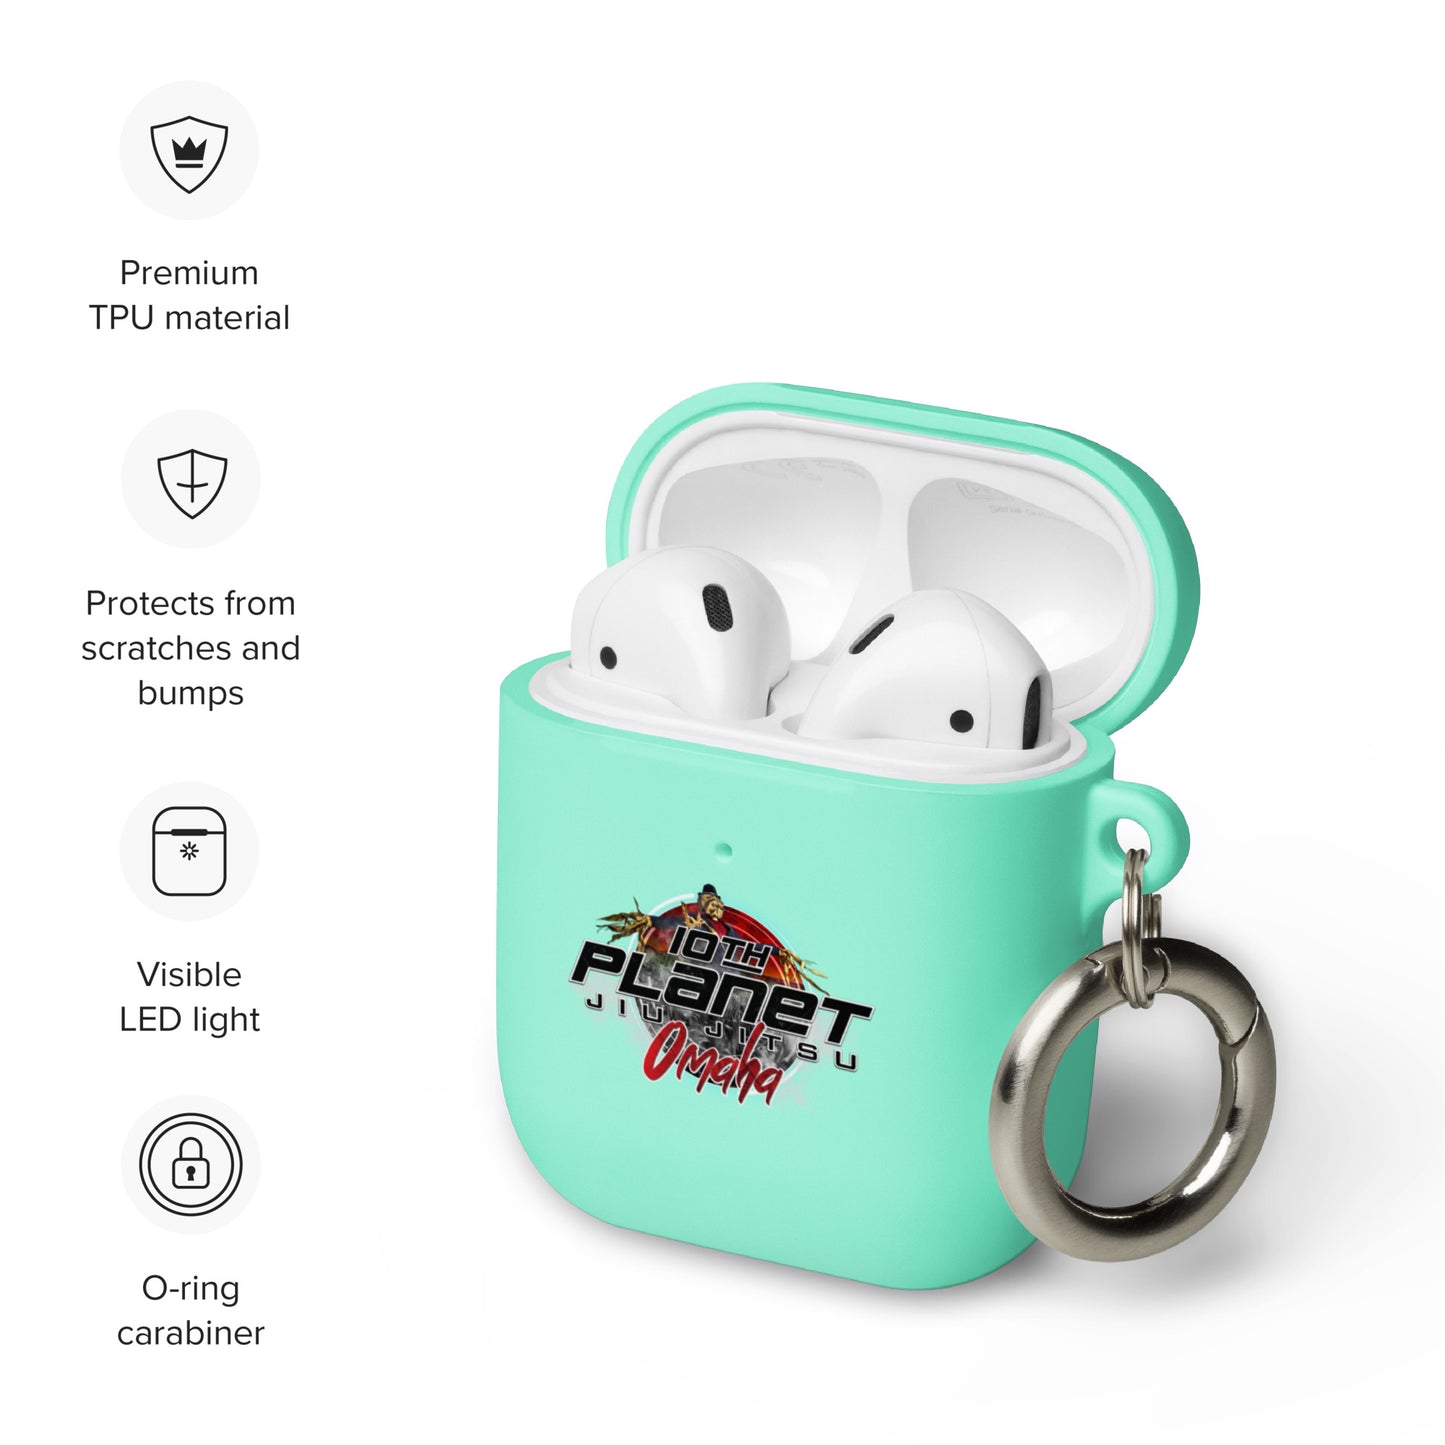 10th Planet Omaha AirPods case